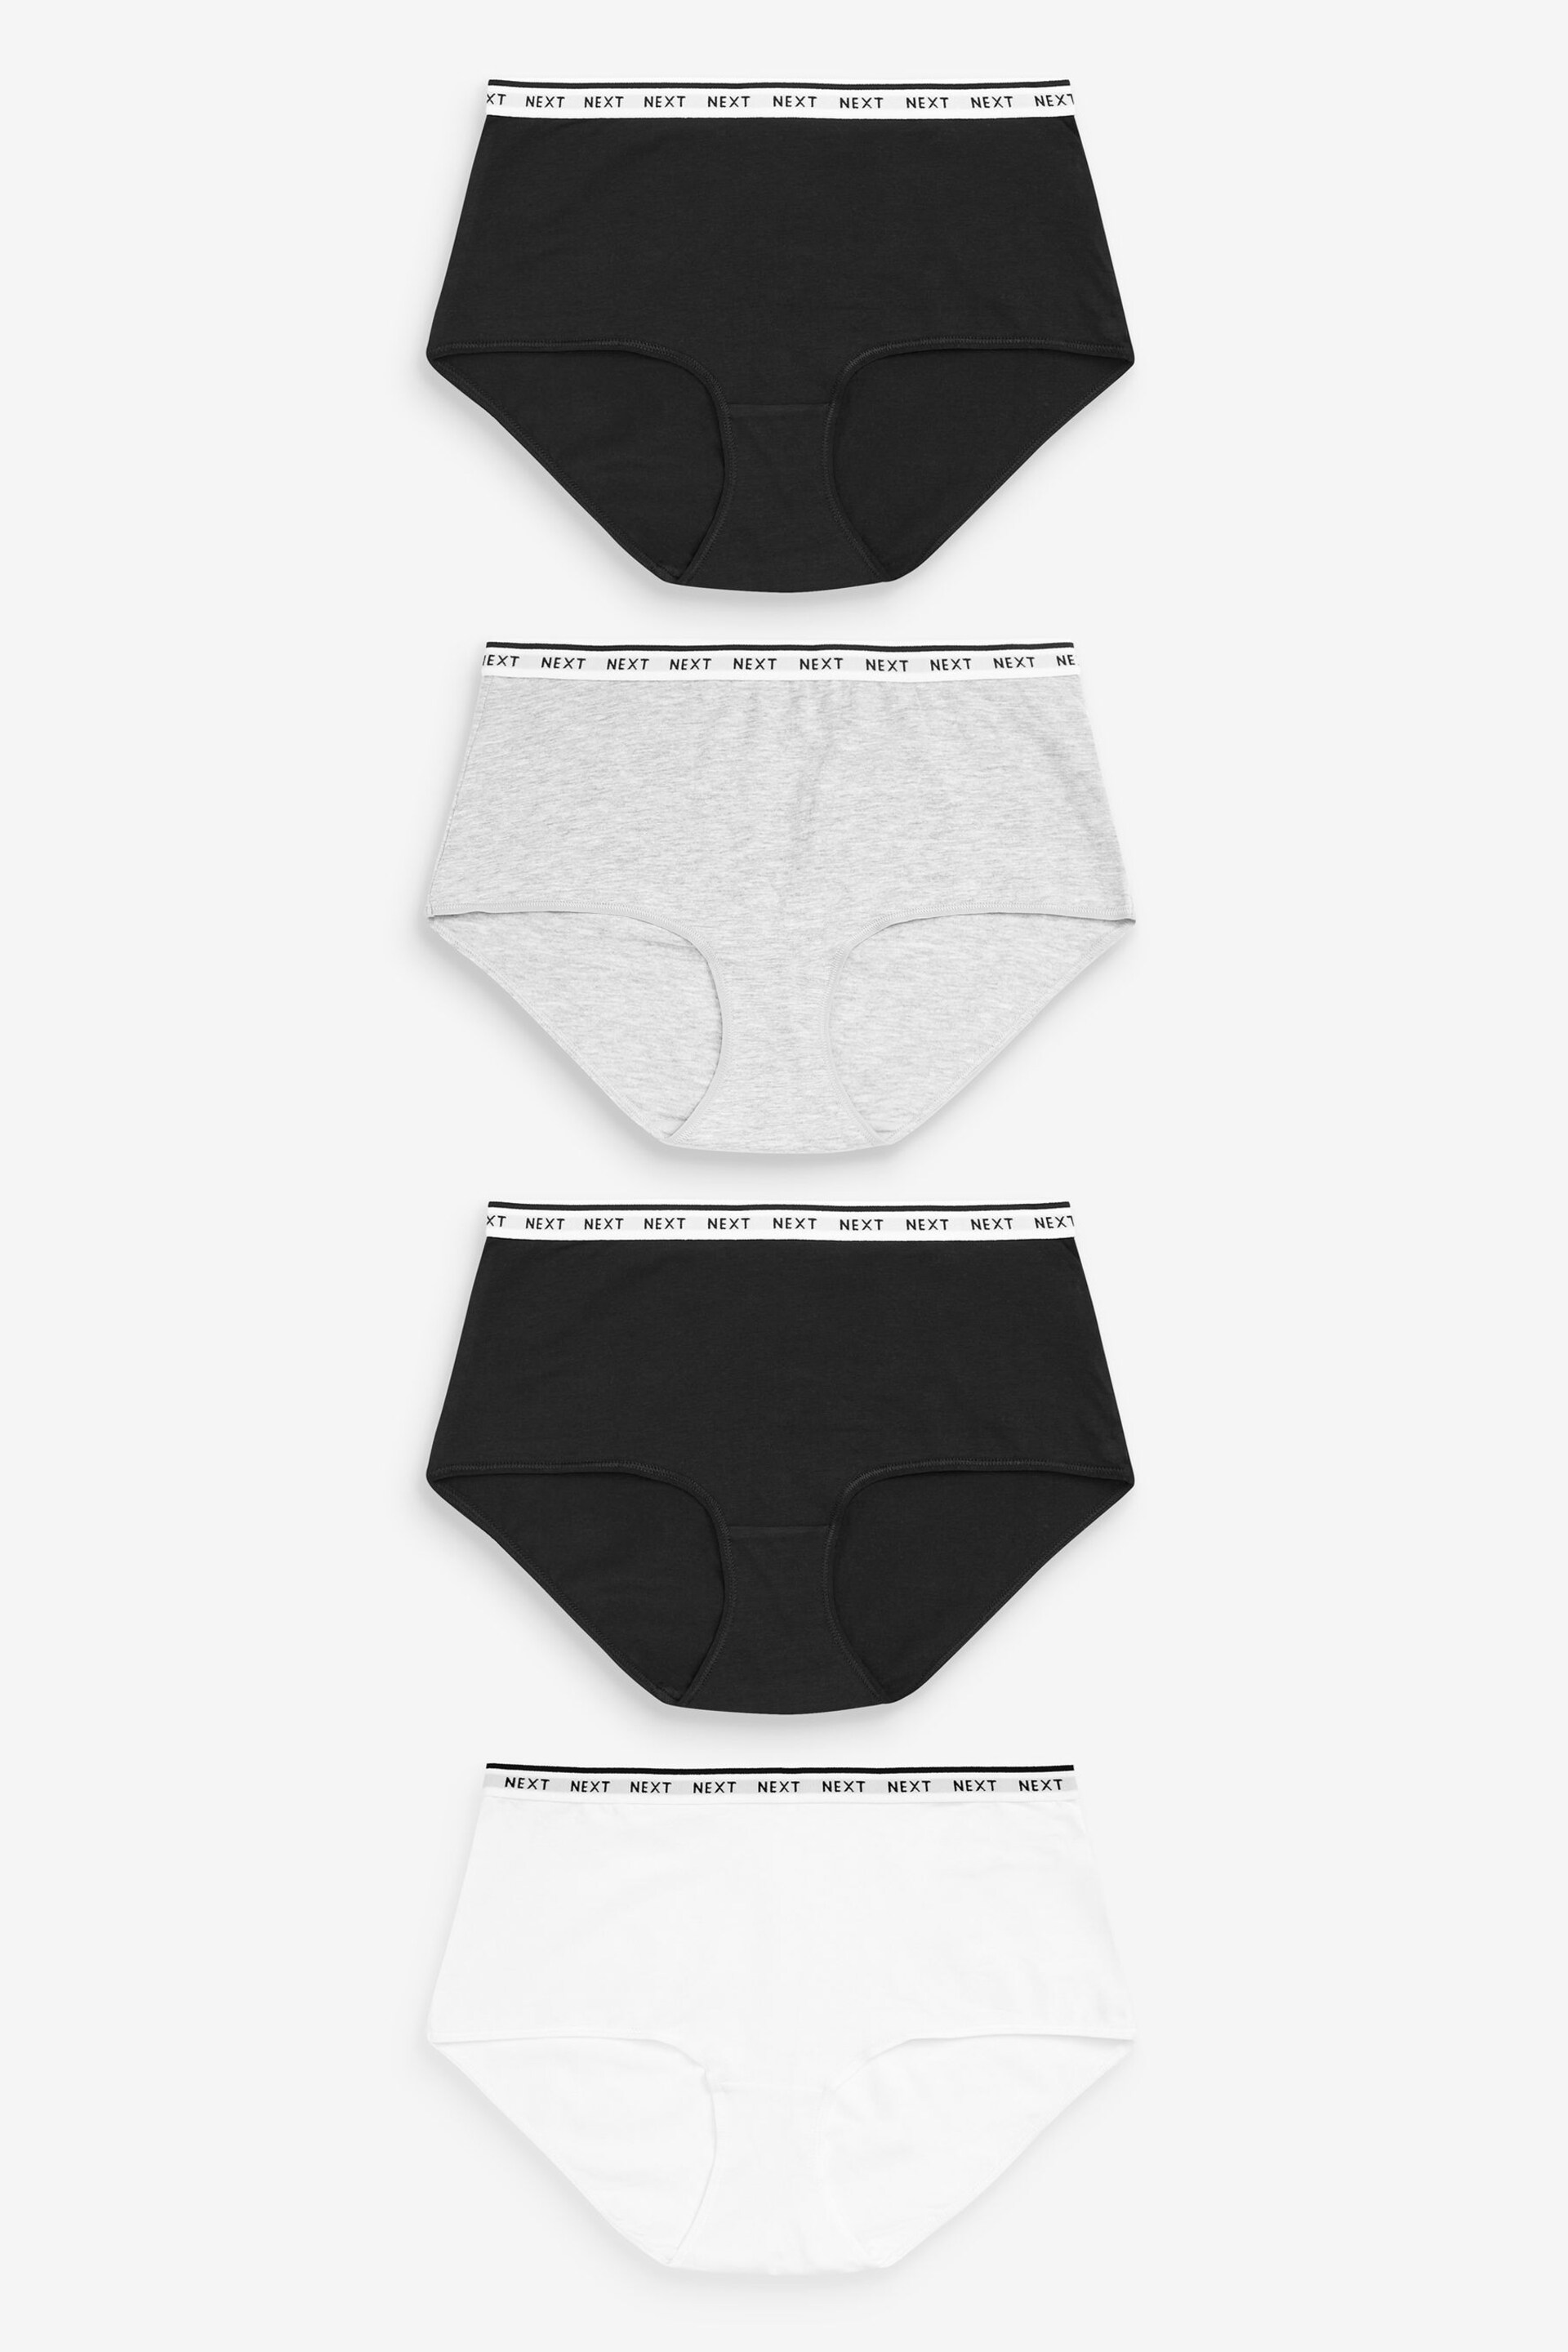 White/Black/Grey Midi Cotton Rich Logo Knickers 4 Pack - Image 1 of 8